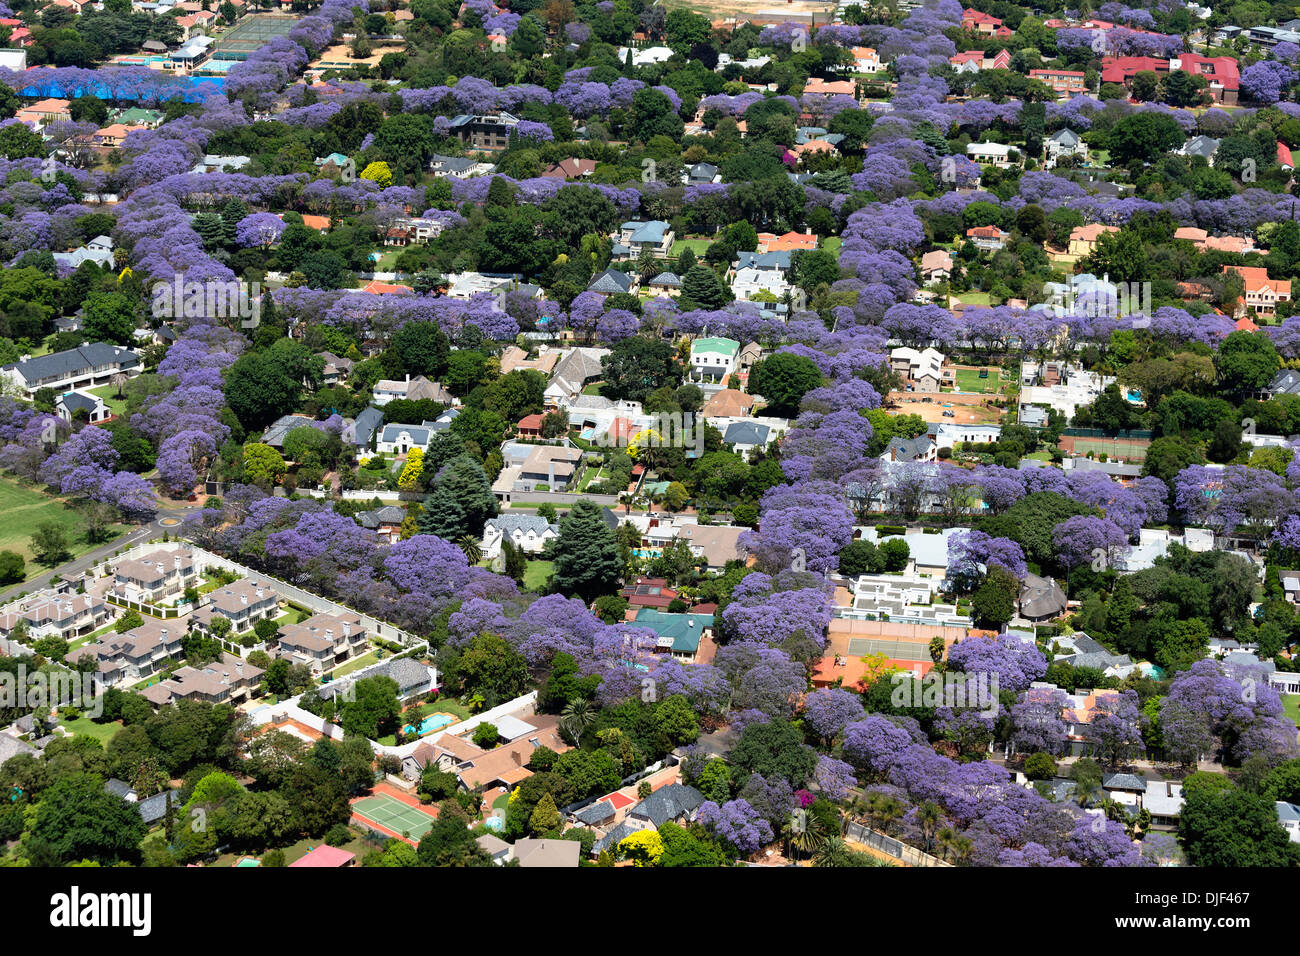 Aerial view of Jacaranda trees in blossom,Johannesburg suburbs, making it one of the greenest cities in the world.South Africa Stock Photo